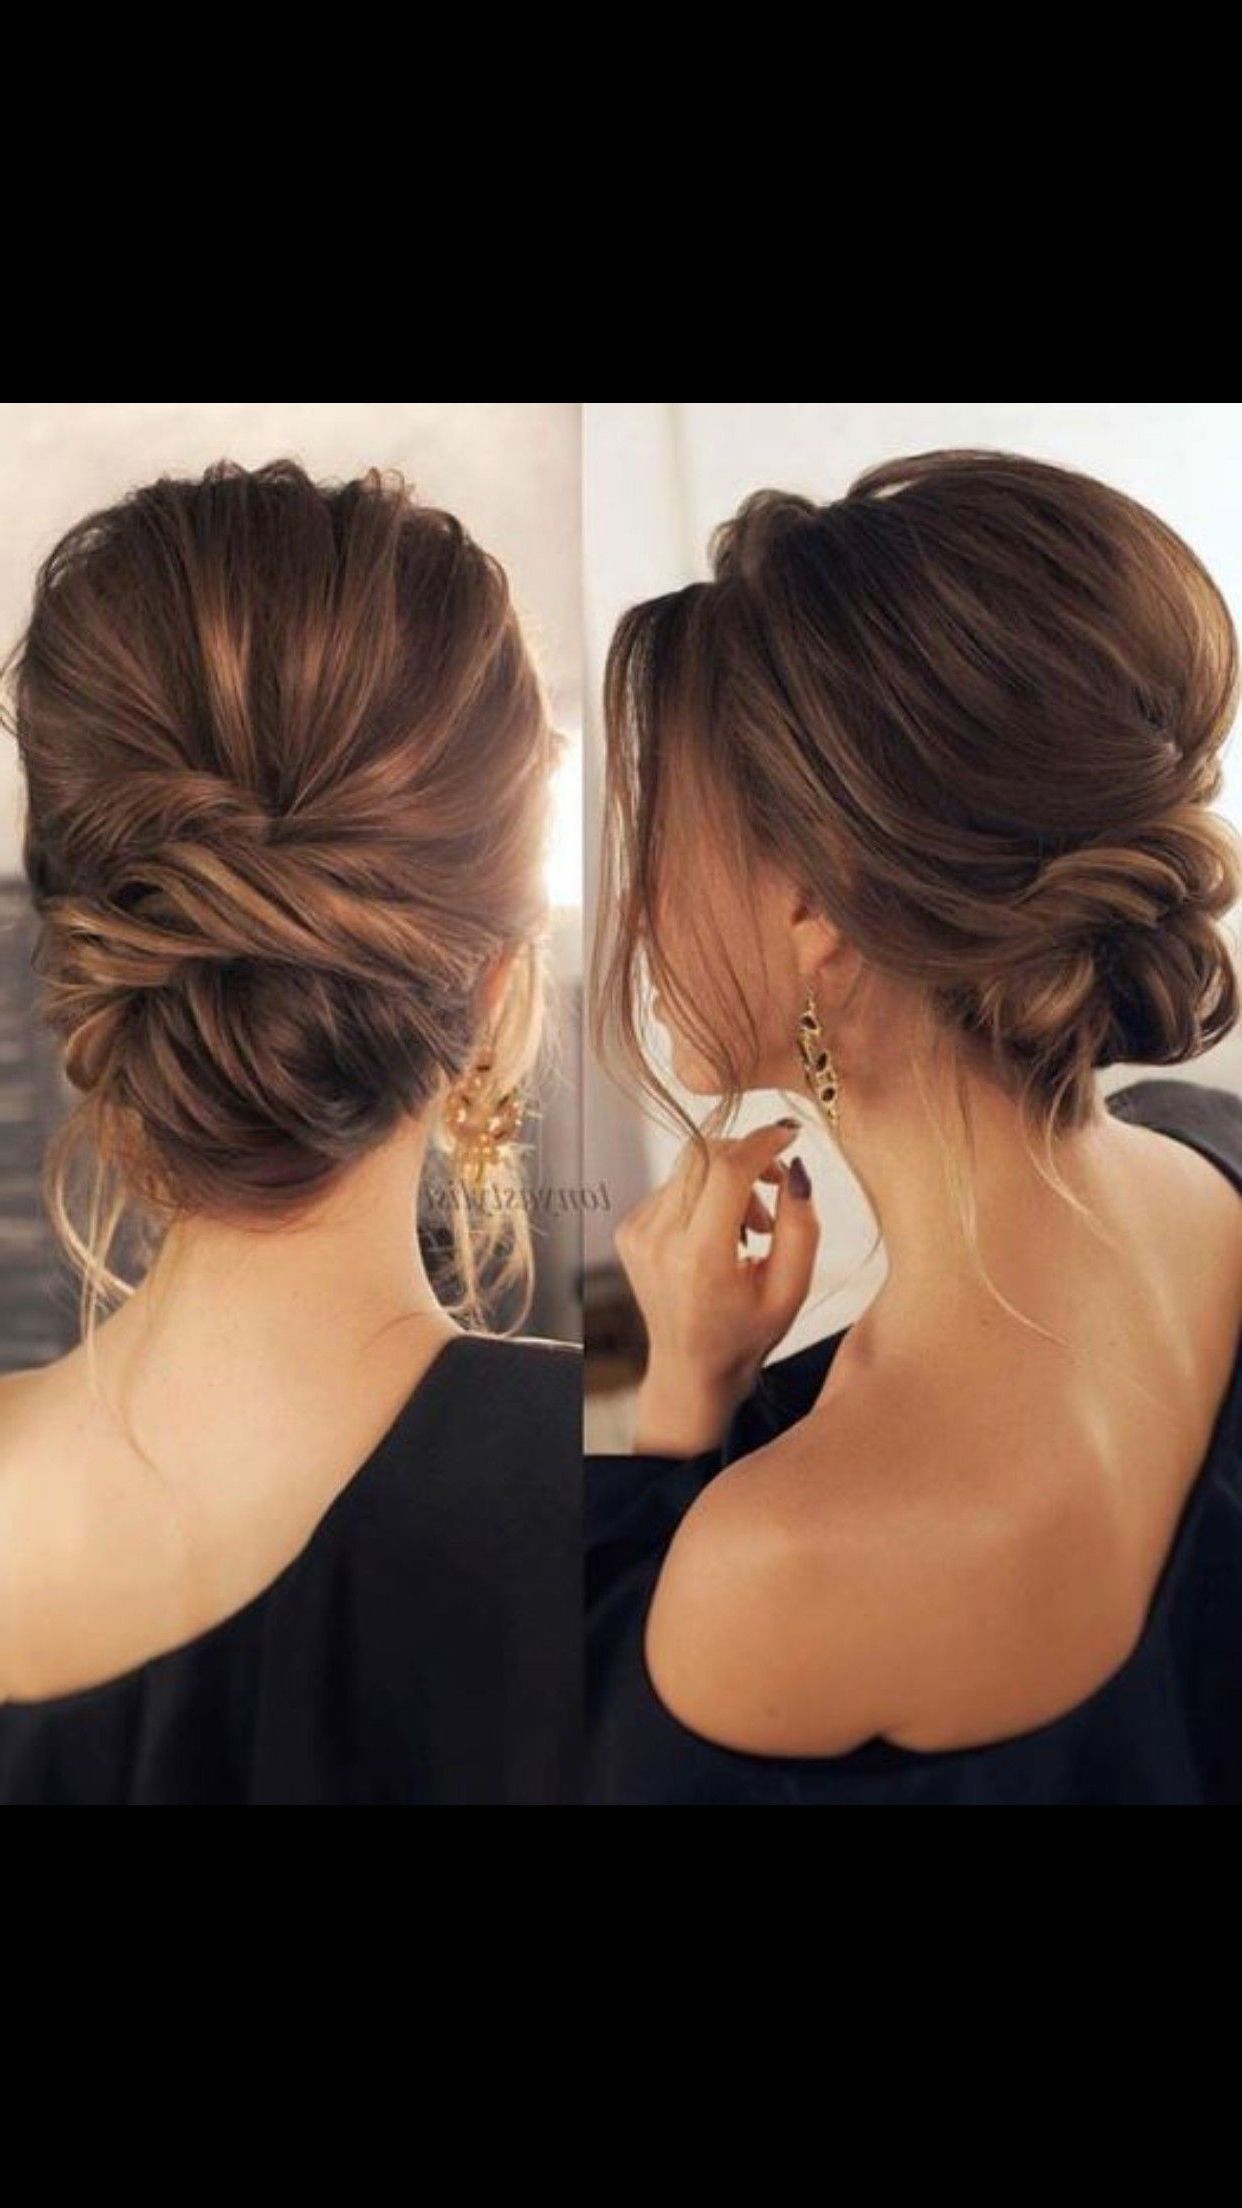 Latest Low Petal Like Bun Prom Hairstyles Inside Hairstyles : Pretty Soft Low Bun Updo Bridal Hair Wedding Buns In (View 10 of 20)